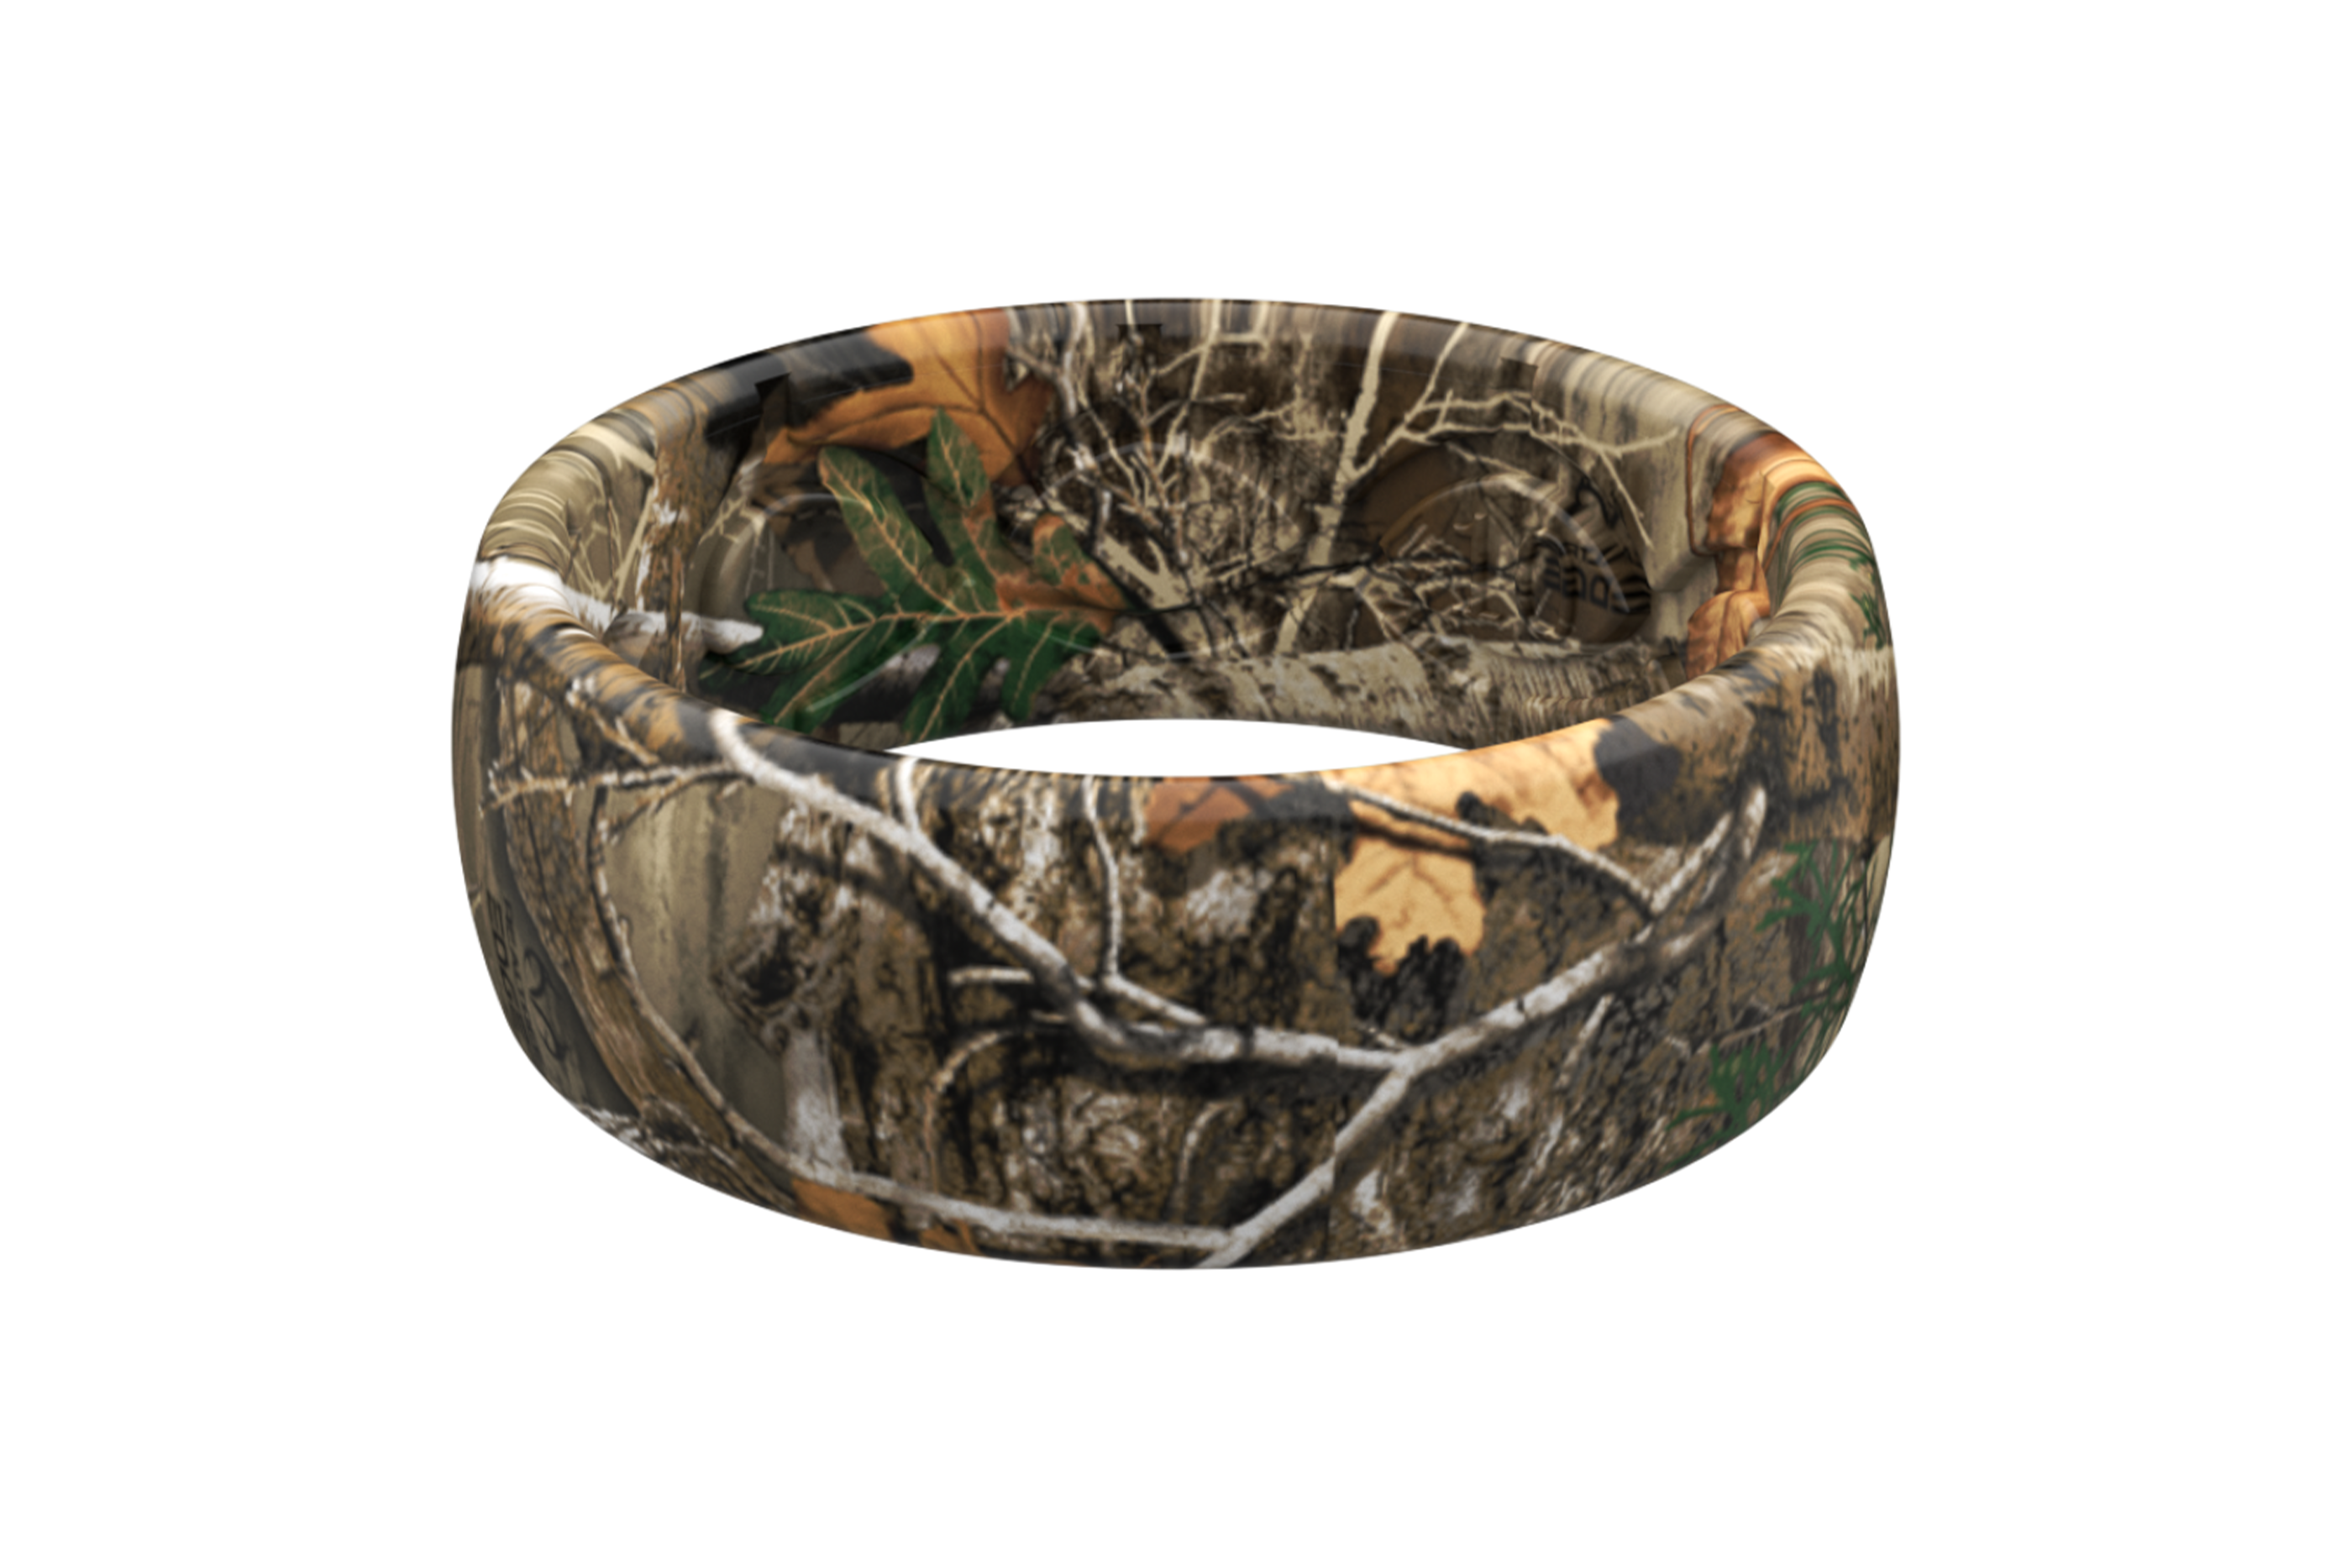 Original Camo Realtree Edge -  viewed from side